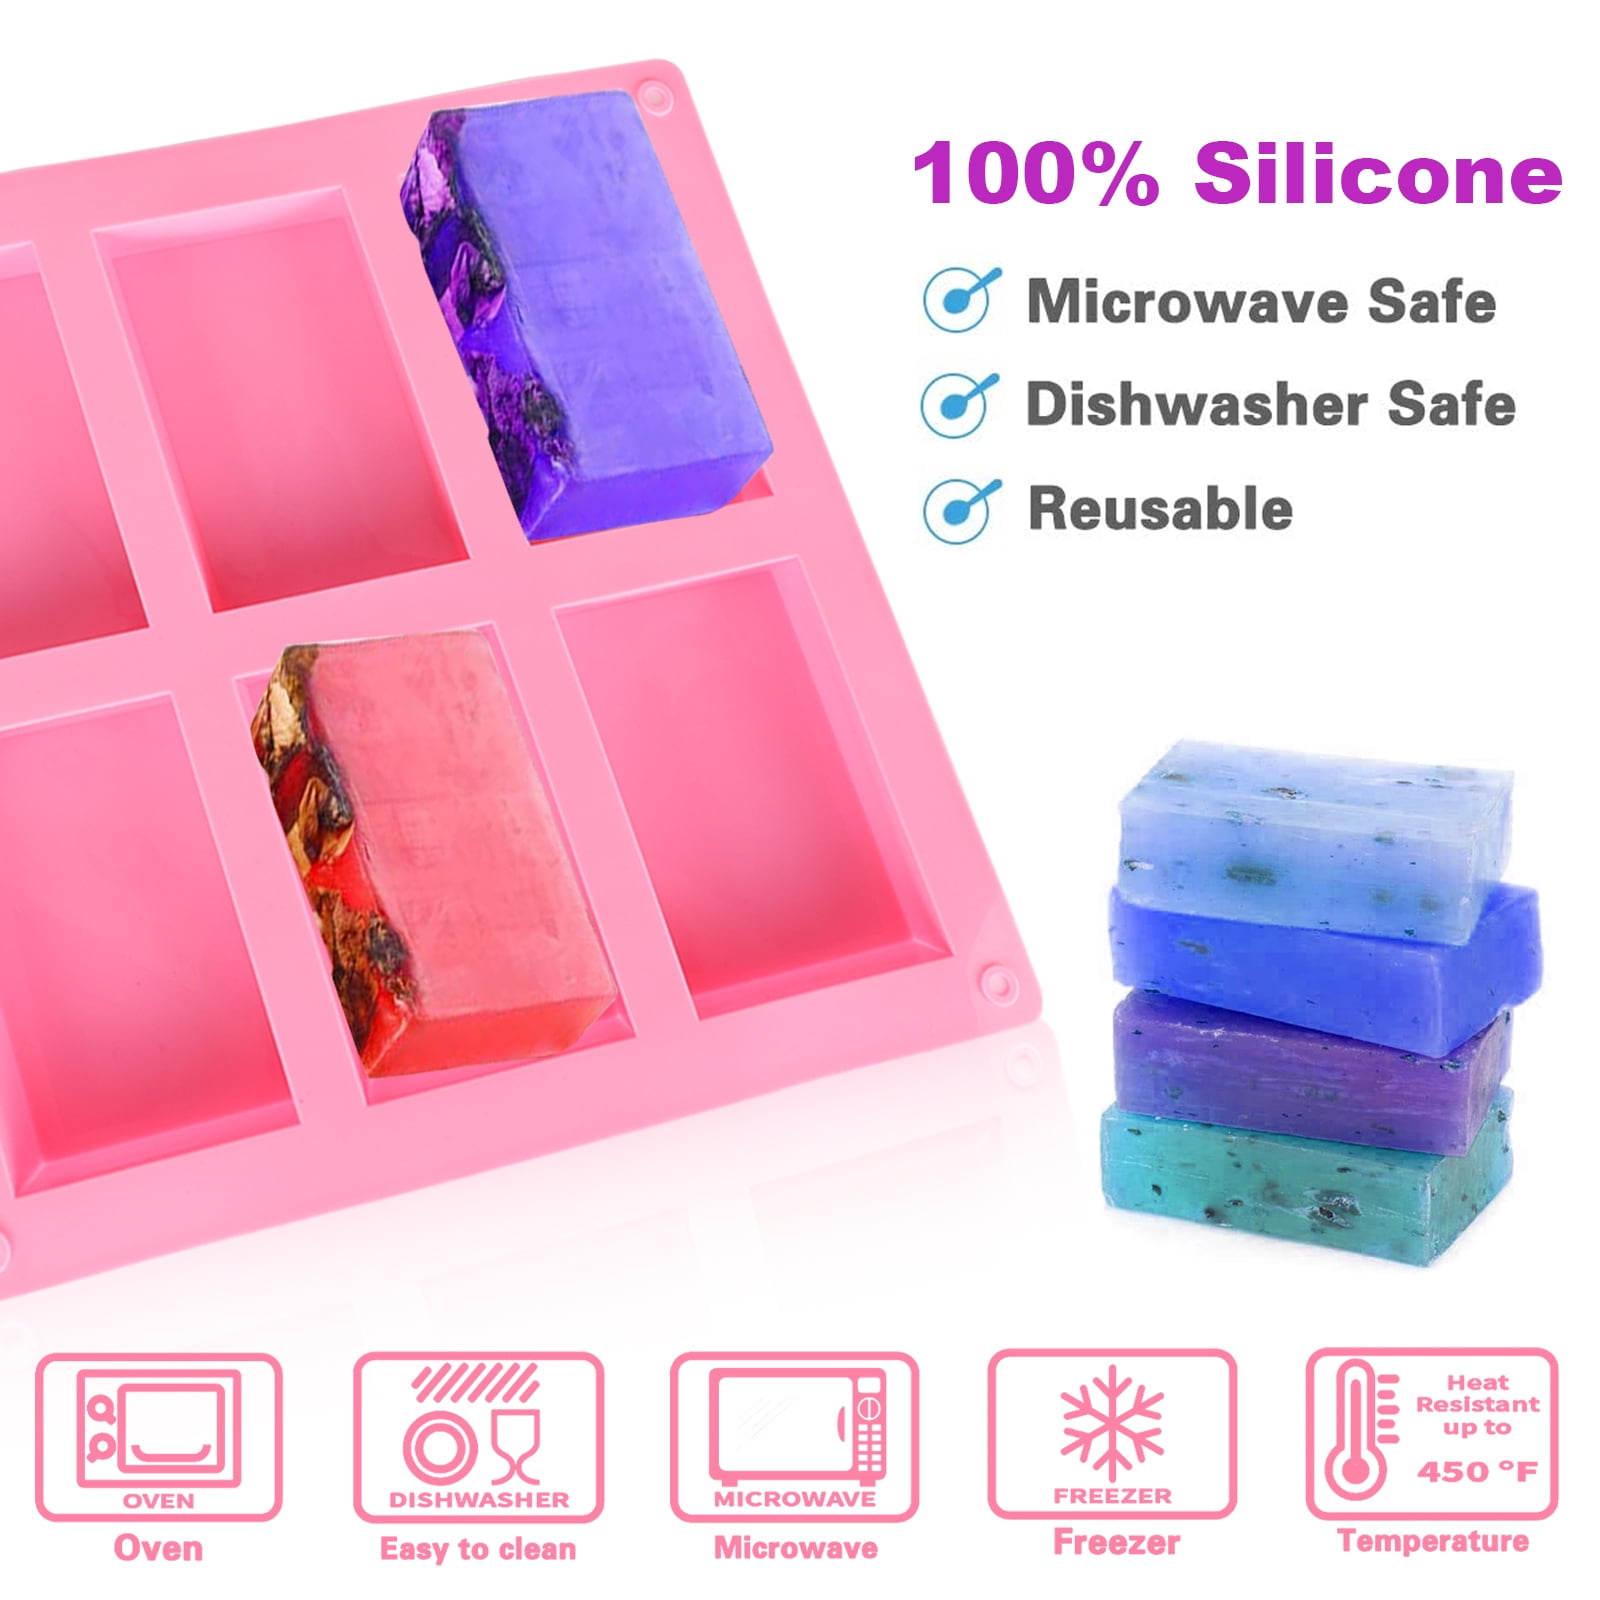 26 Cavities Alphabet Silicone Mold,DanziX Capital Letter Cake Baking Pan Muffin Cups Handmade Soap Moulds Chocolate Biscuit Ice Cube Tray DIY Molds